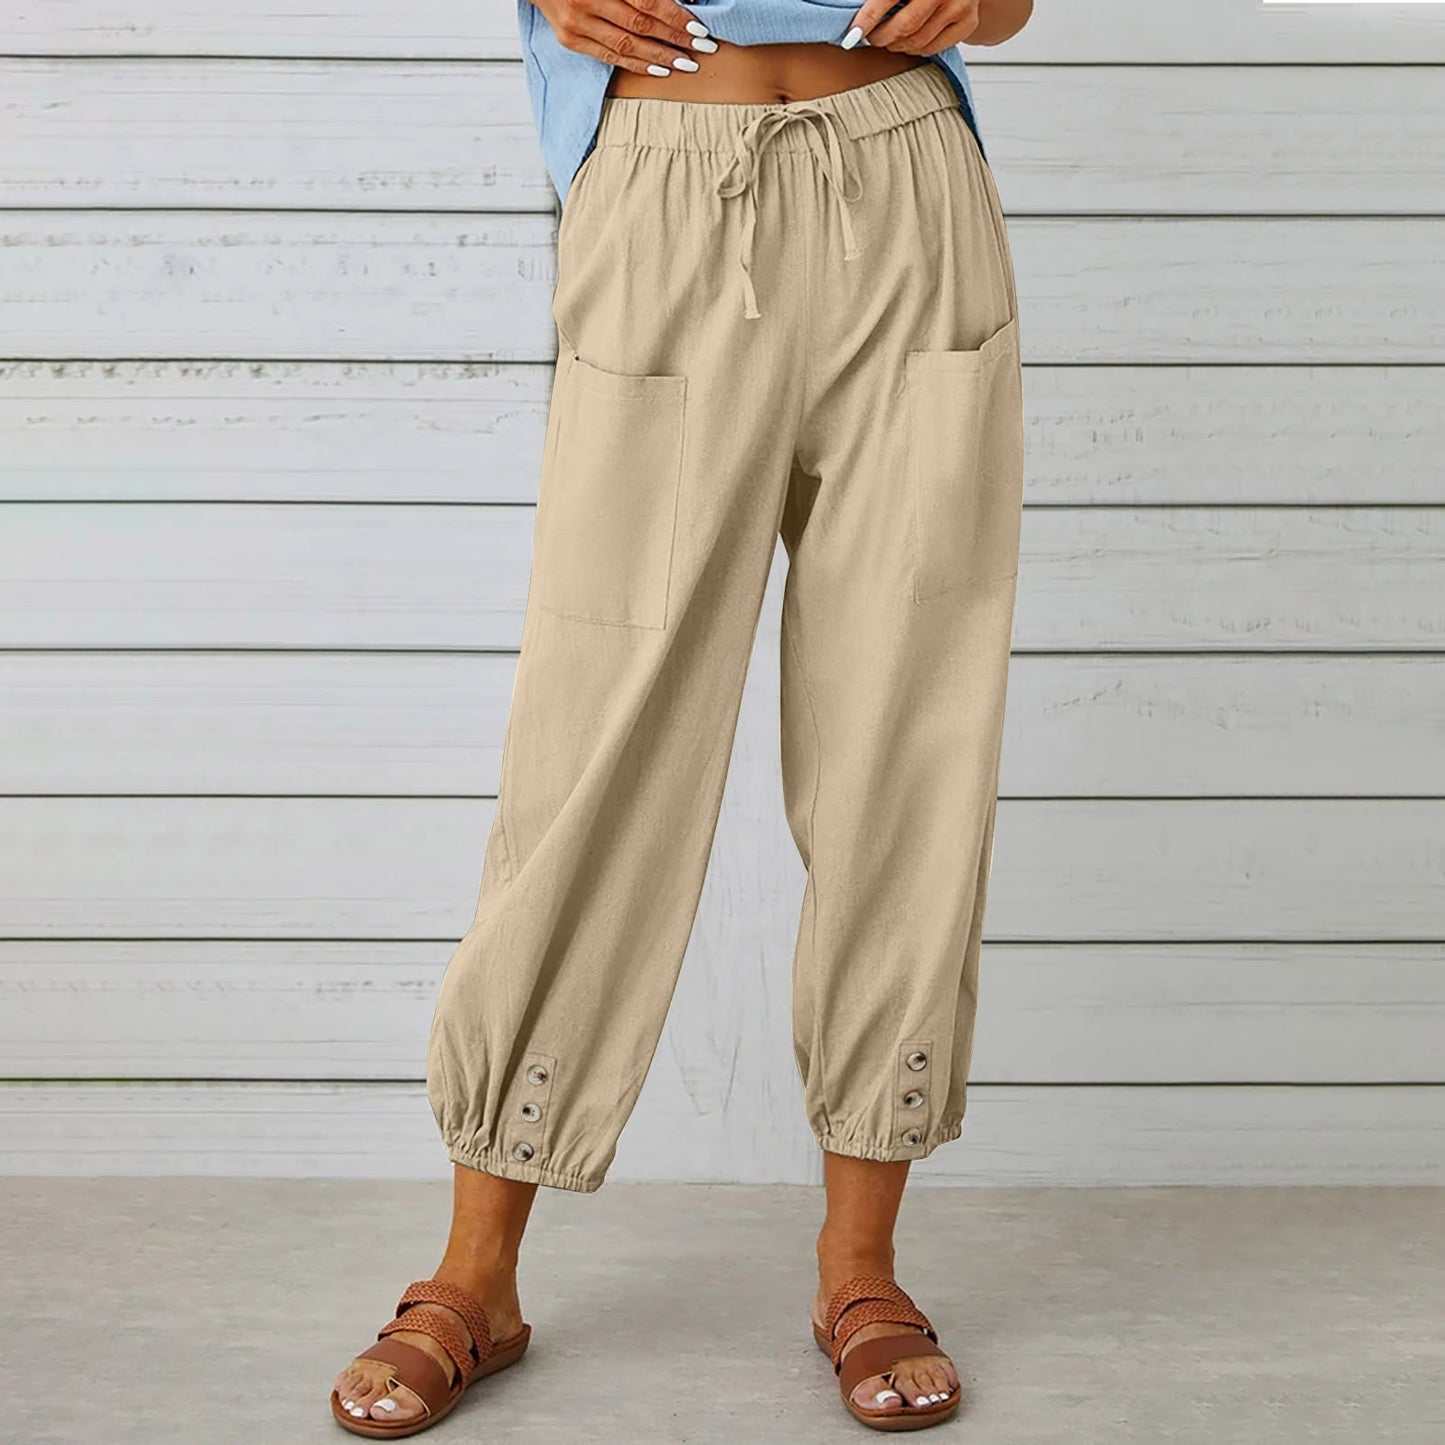 Effortless Comfort and Style: Women's Drawstring Tie Pants